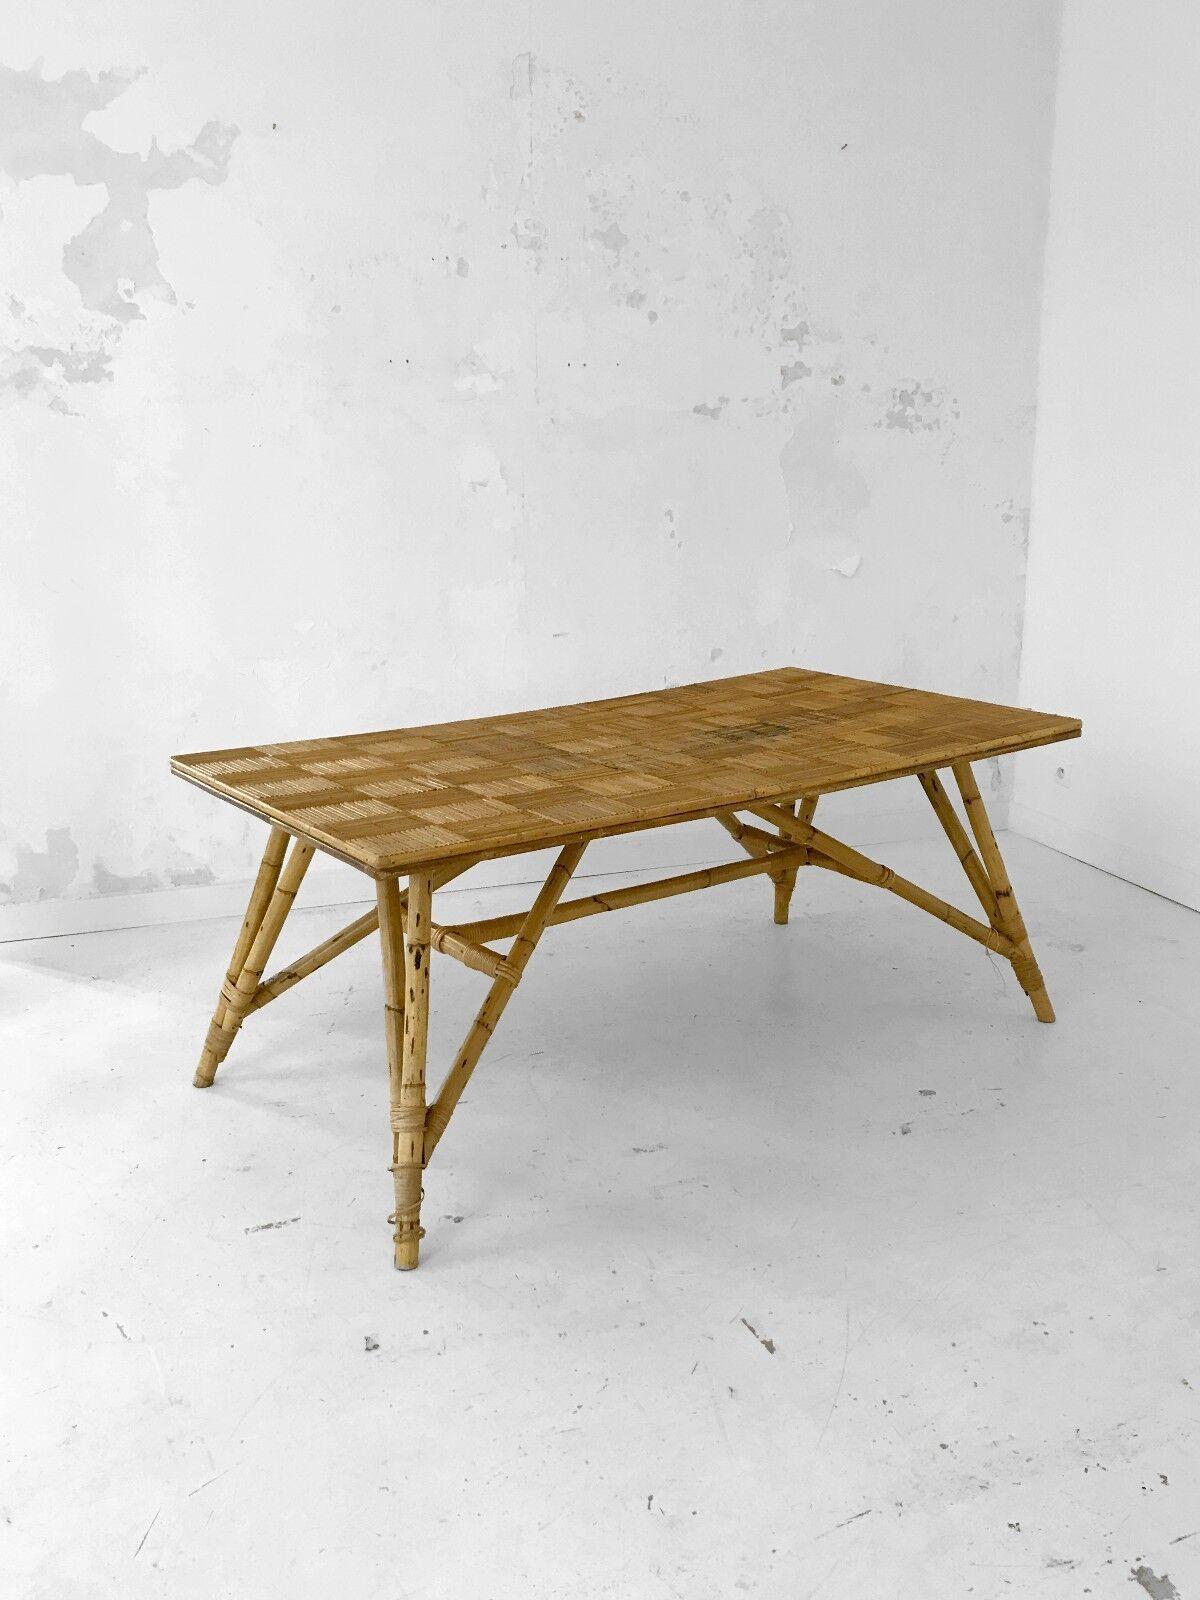 A spectacular dining table, modernist, constructivist, free-form, bamboo structure with dynamic lines, large wooden top inlaid with wicker checkerboards, by Audoux-Minnet, France 1970.
An exceptional model, in terms of its design, its dimensions,